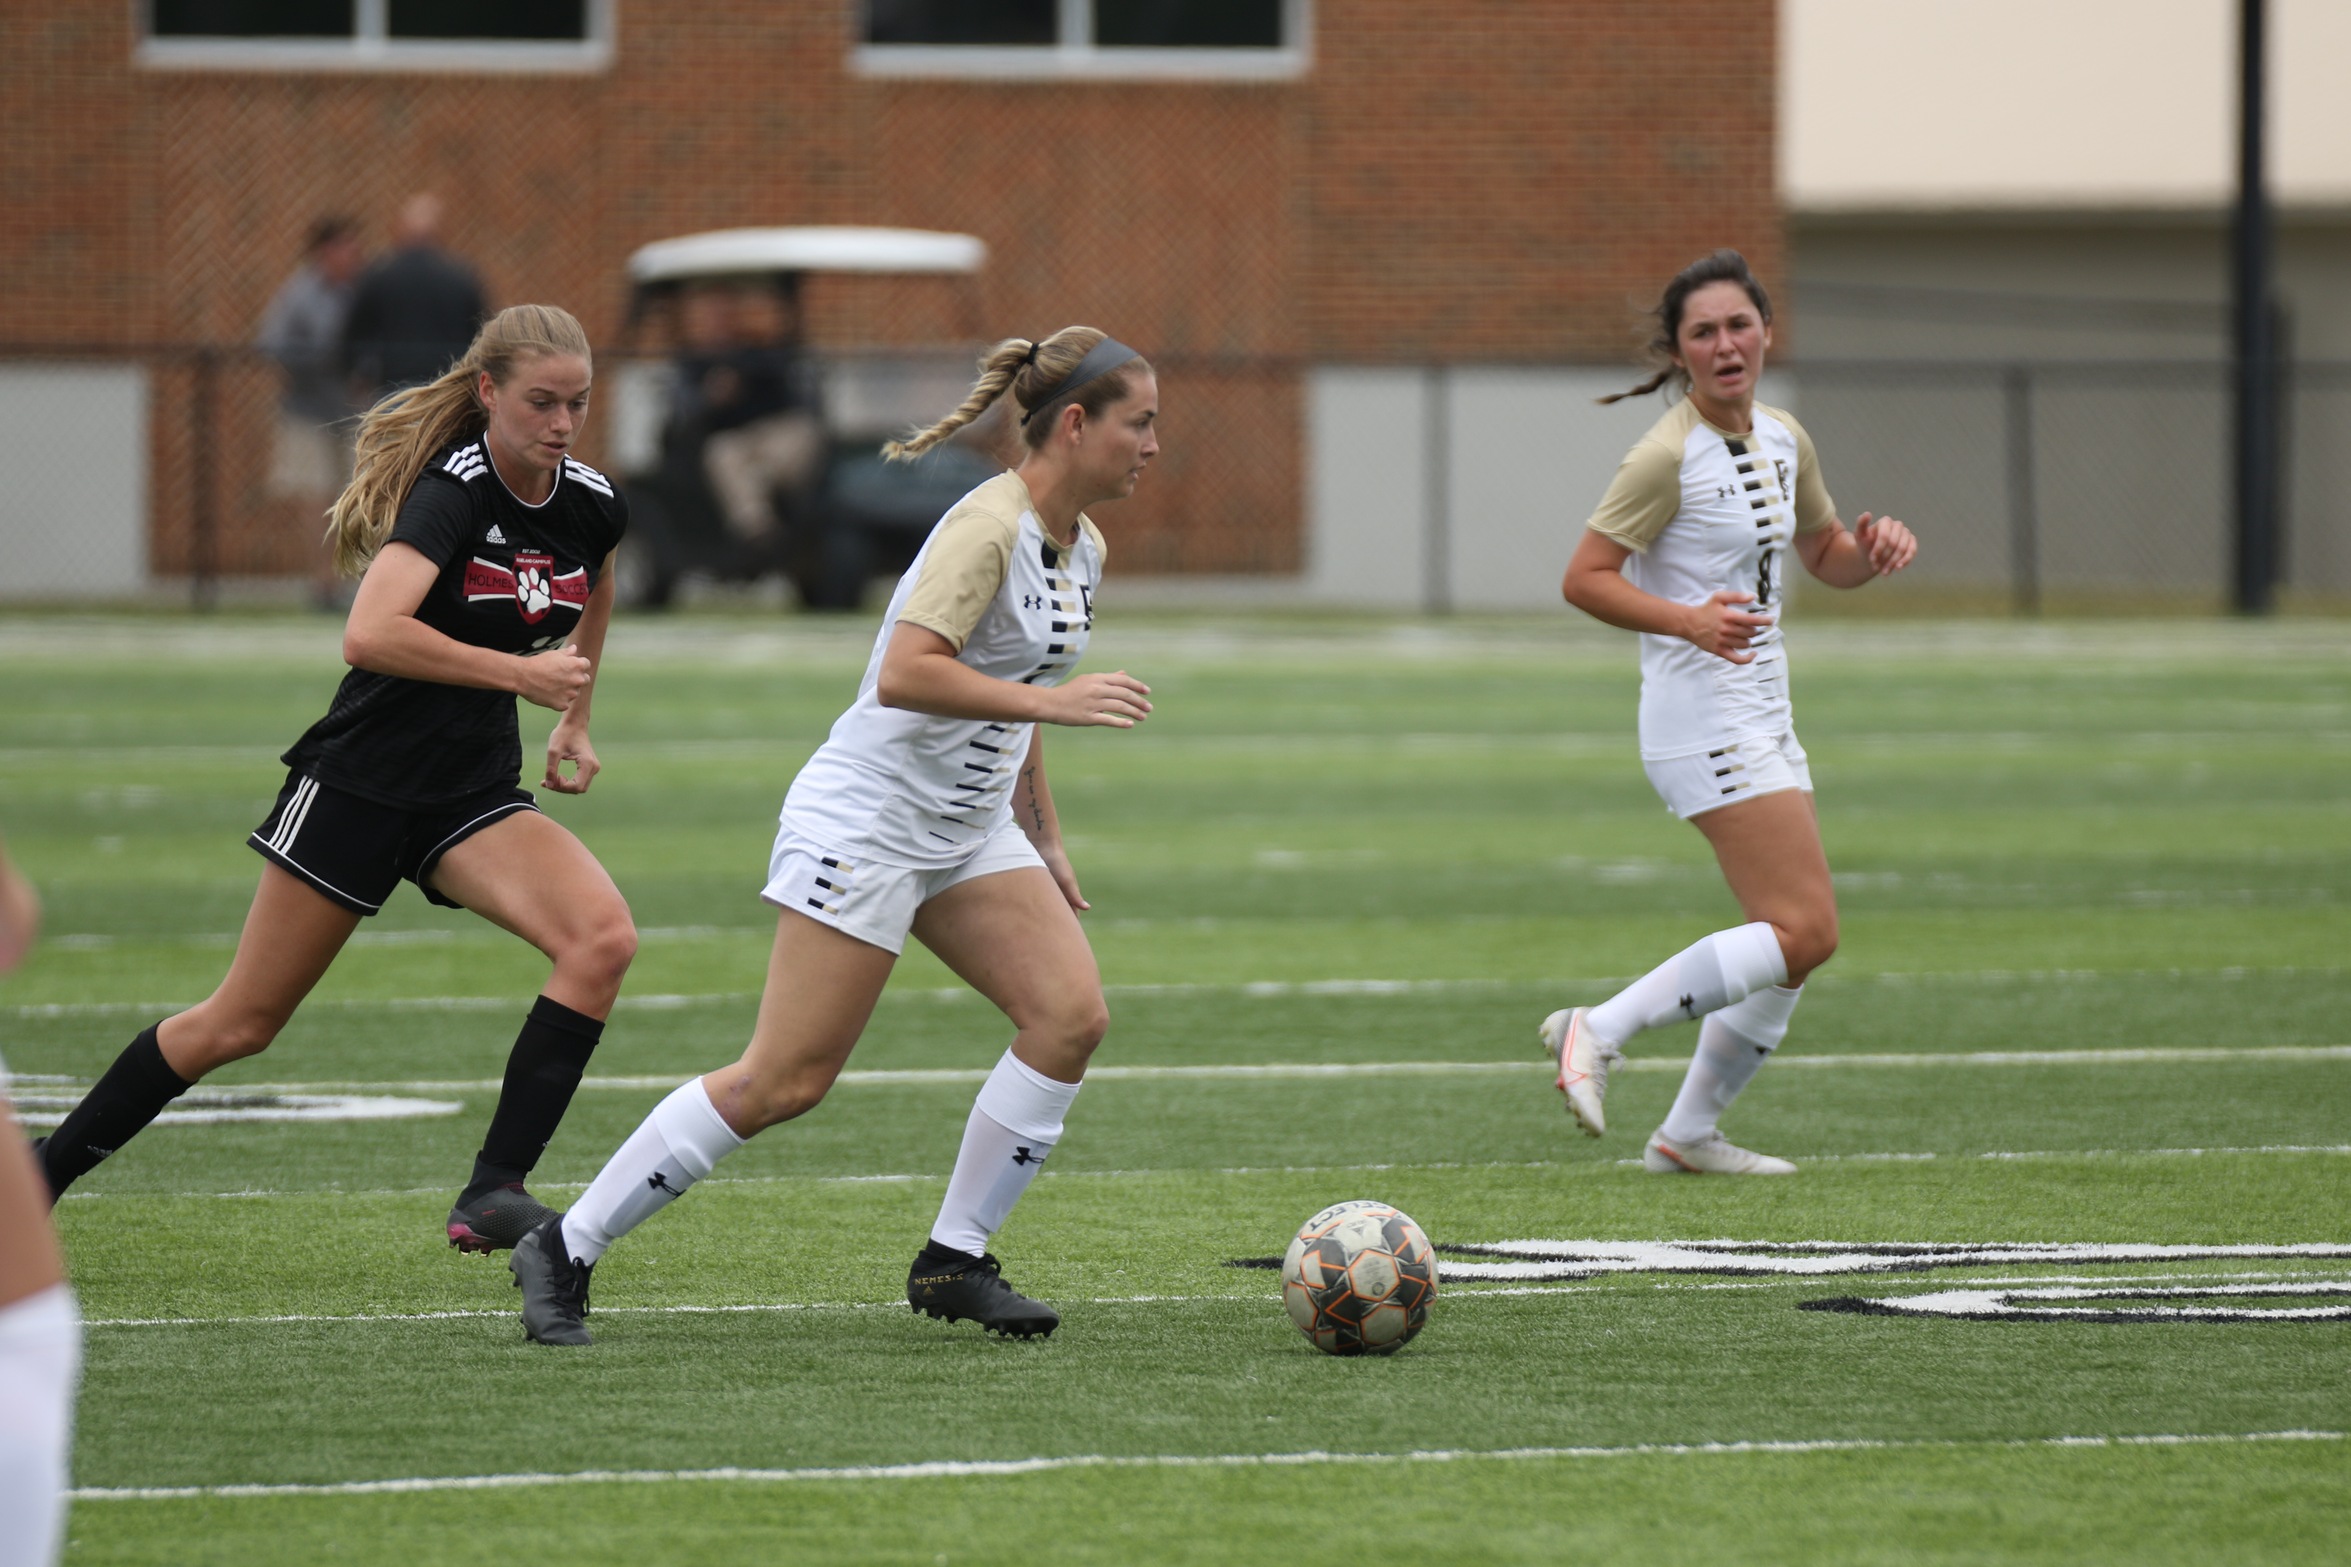 No. 2 Holmes and No. 18 ECCC end in scoreless draw